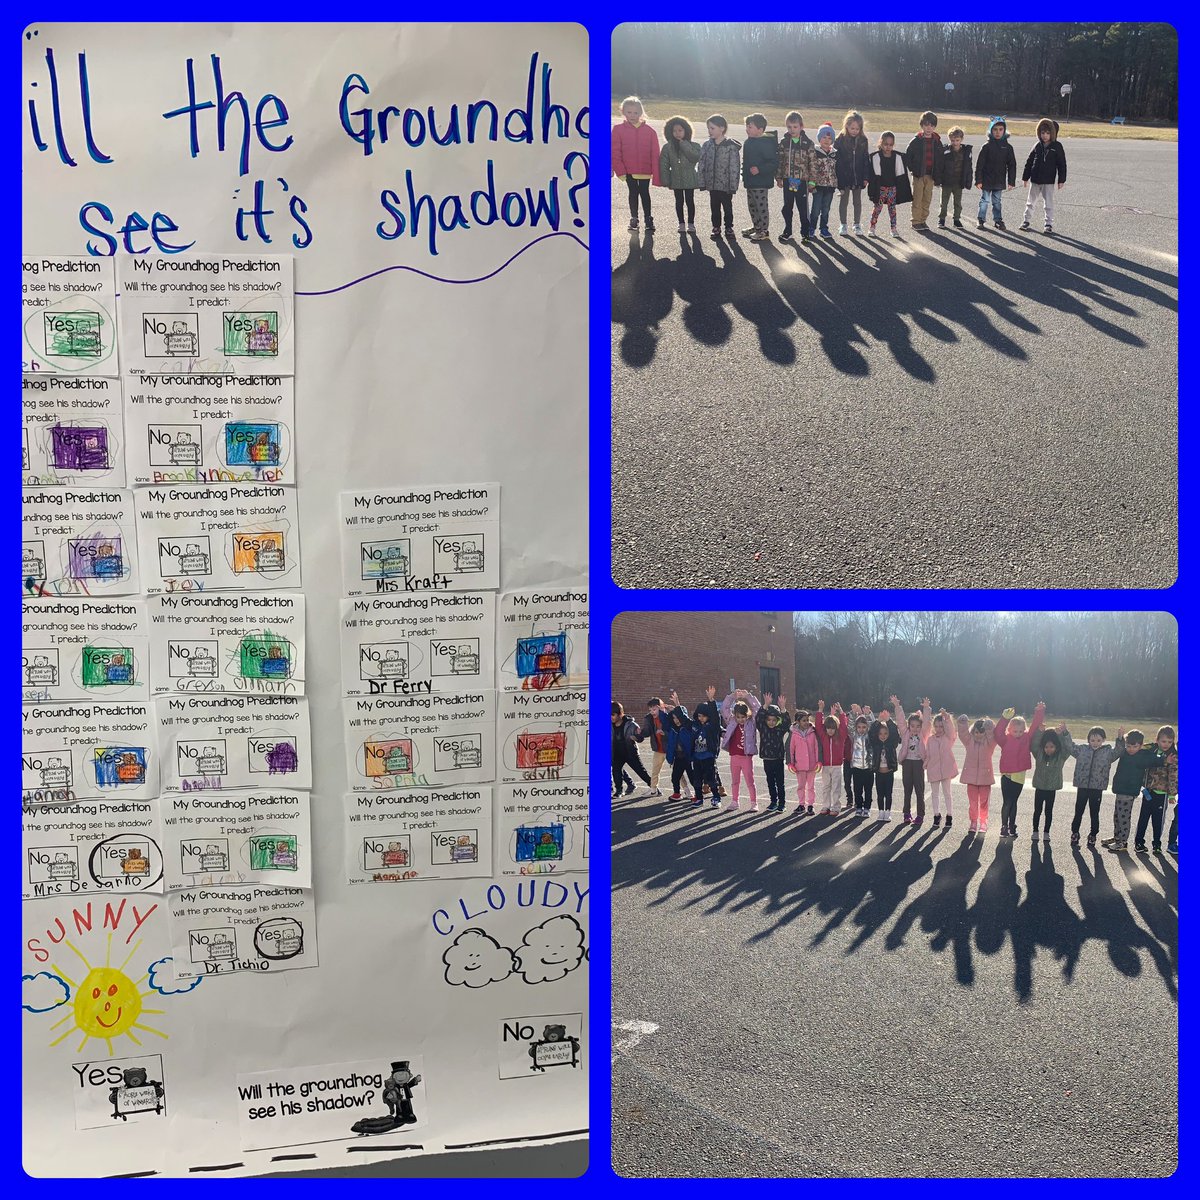 Ss learned that shadows are made by blocking light. We demonstrated this by blocking the sunlight with a solid object (kindergarteners). We than predicted if the groundhog will see his shadow or not…@kristin_1005 @VoorheesPrin @renee9kraft  #littlelearners